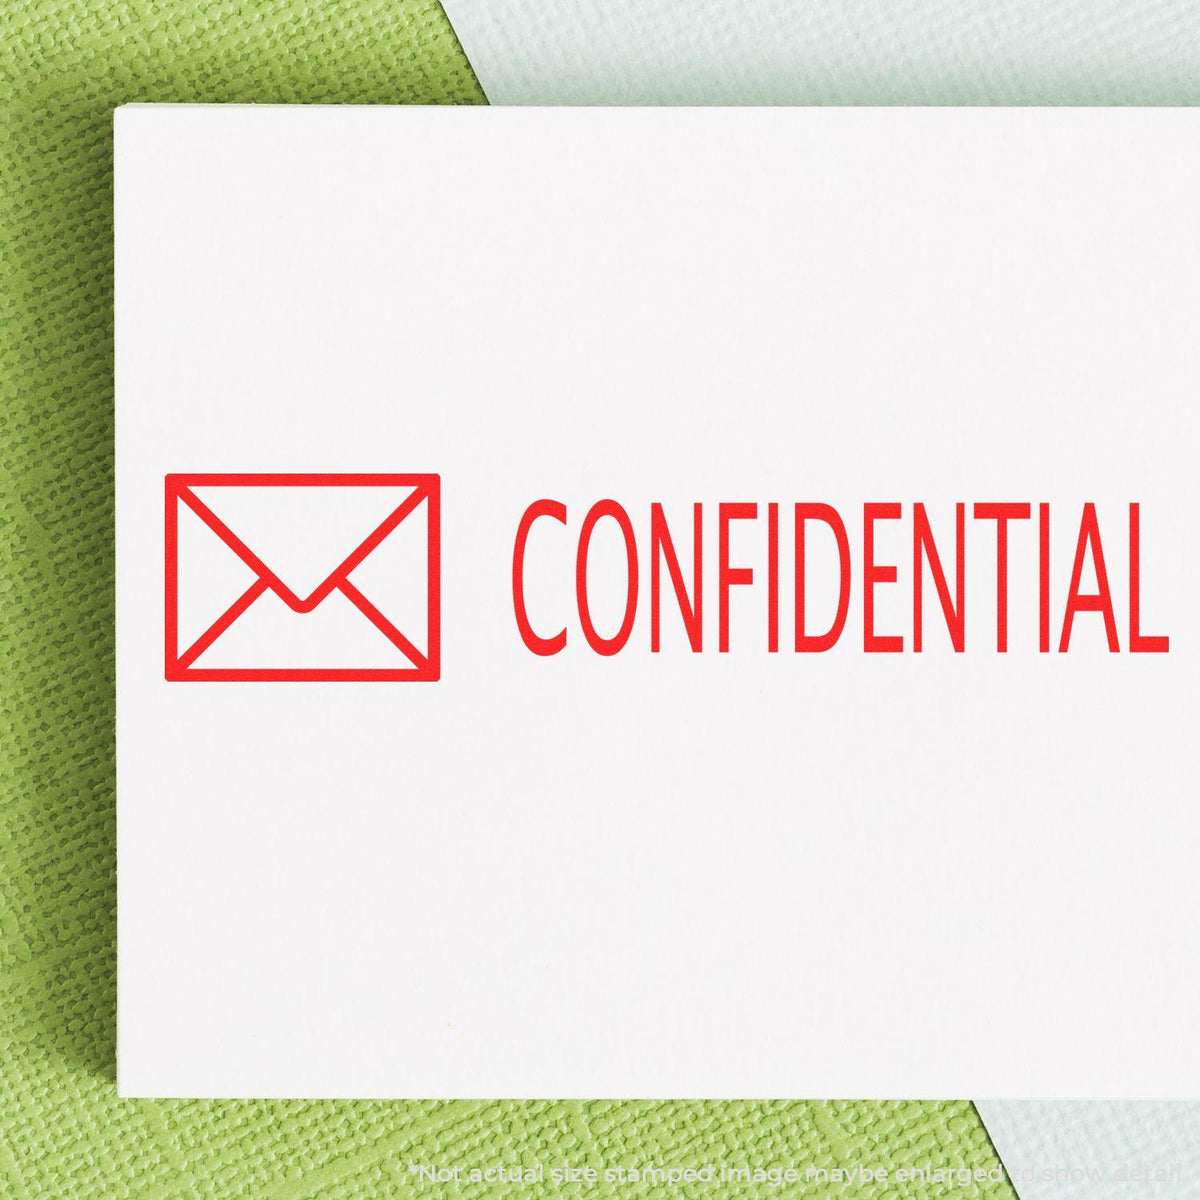 In Use Large Pre-Inked Confidential with Envelope Stamp Image